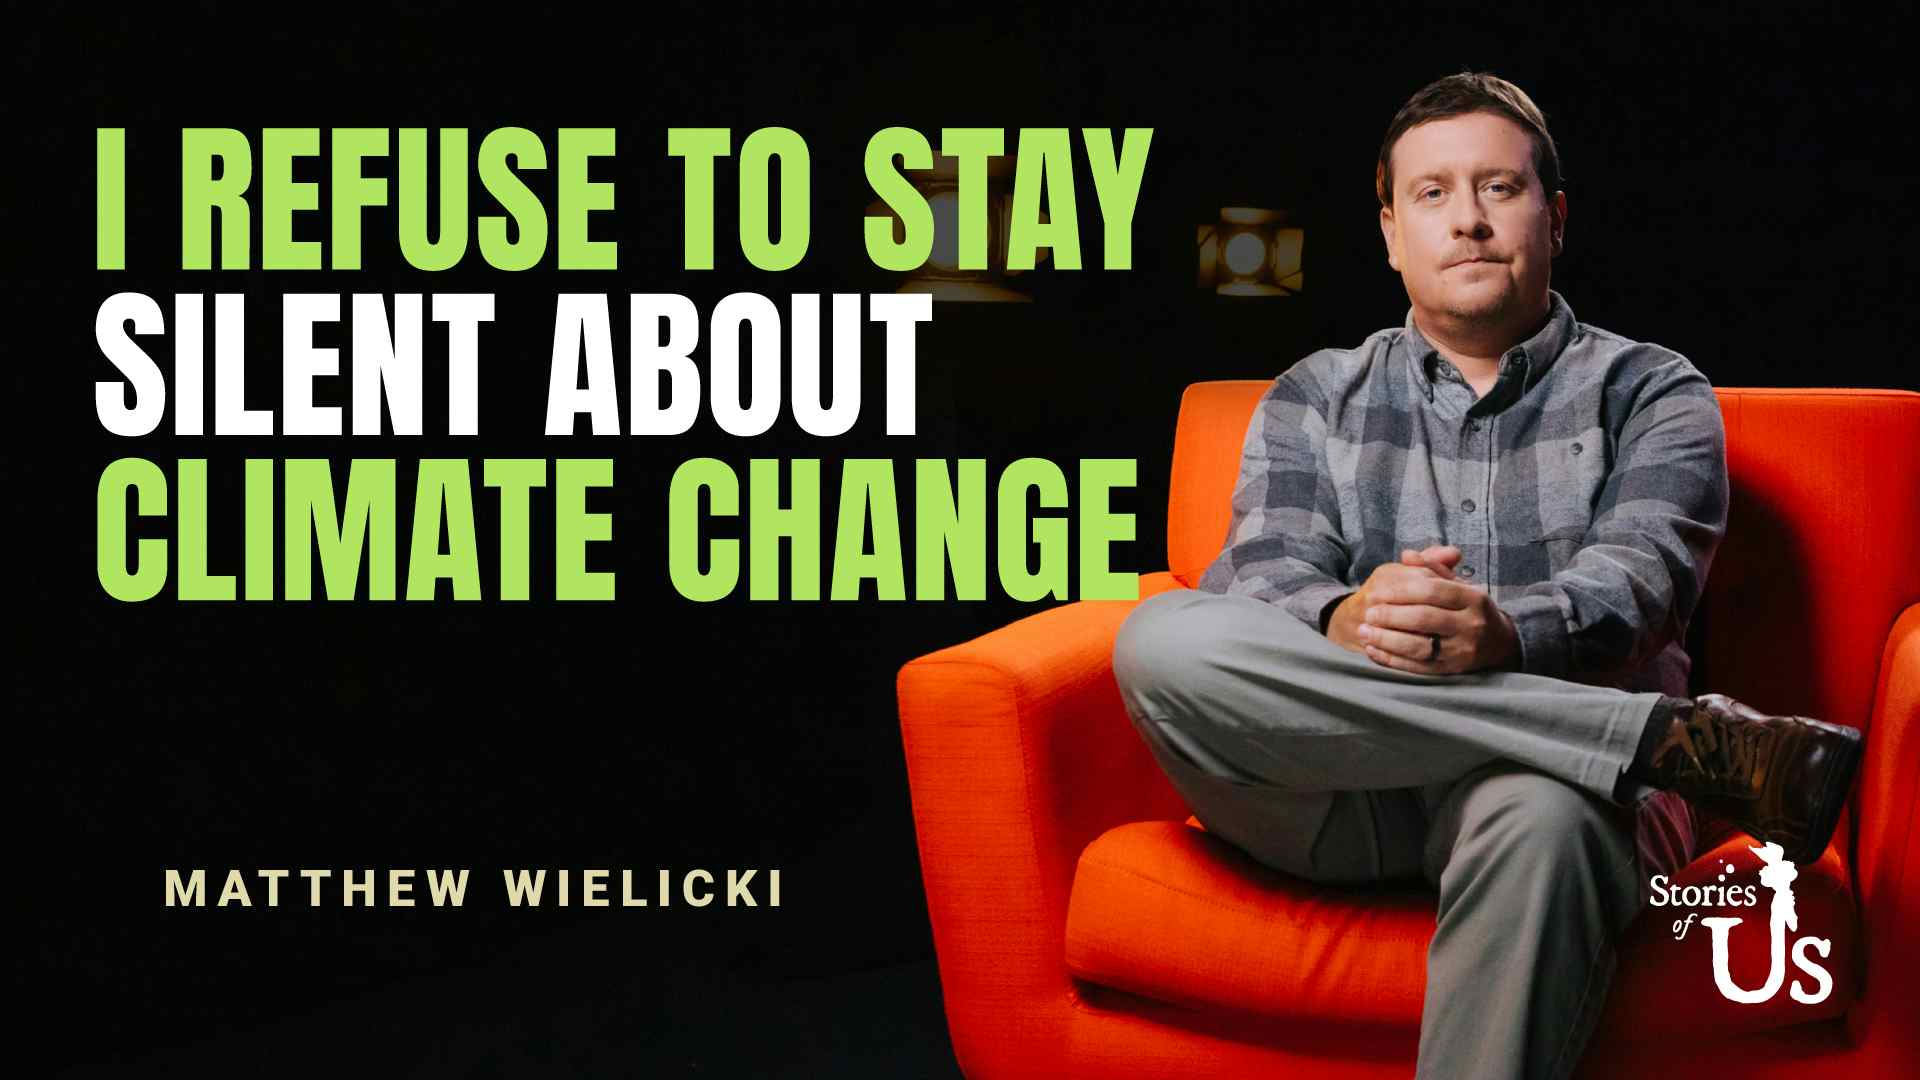 Dr. Matthew Wielicki: I Refuse to Stay Silent about Climate Change